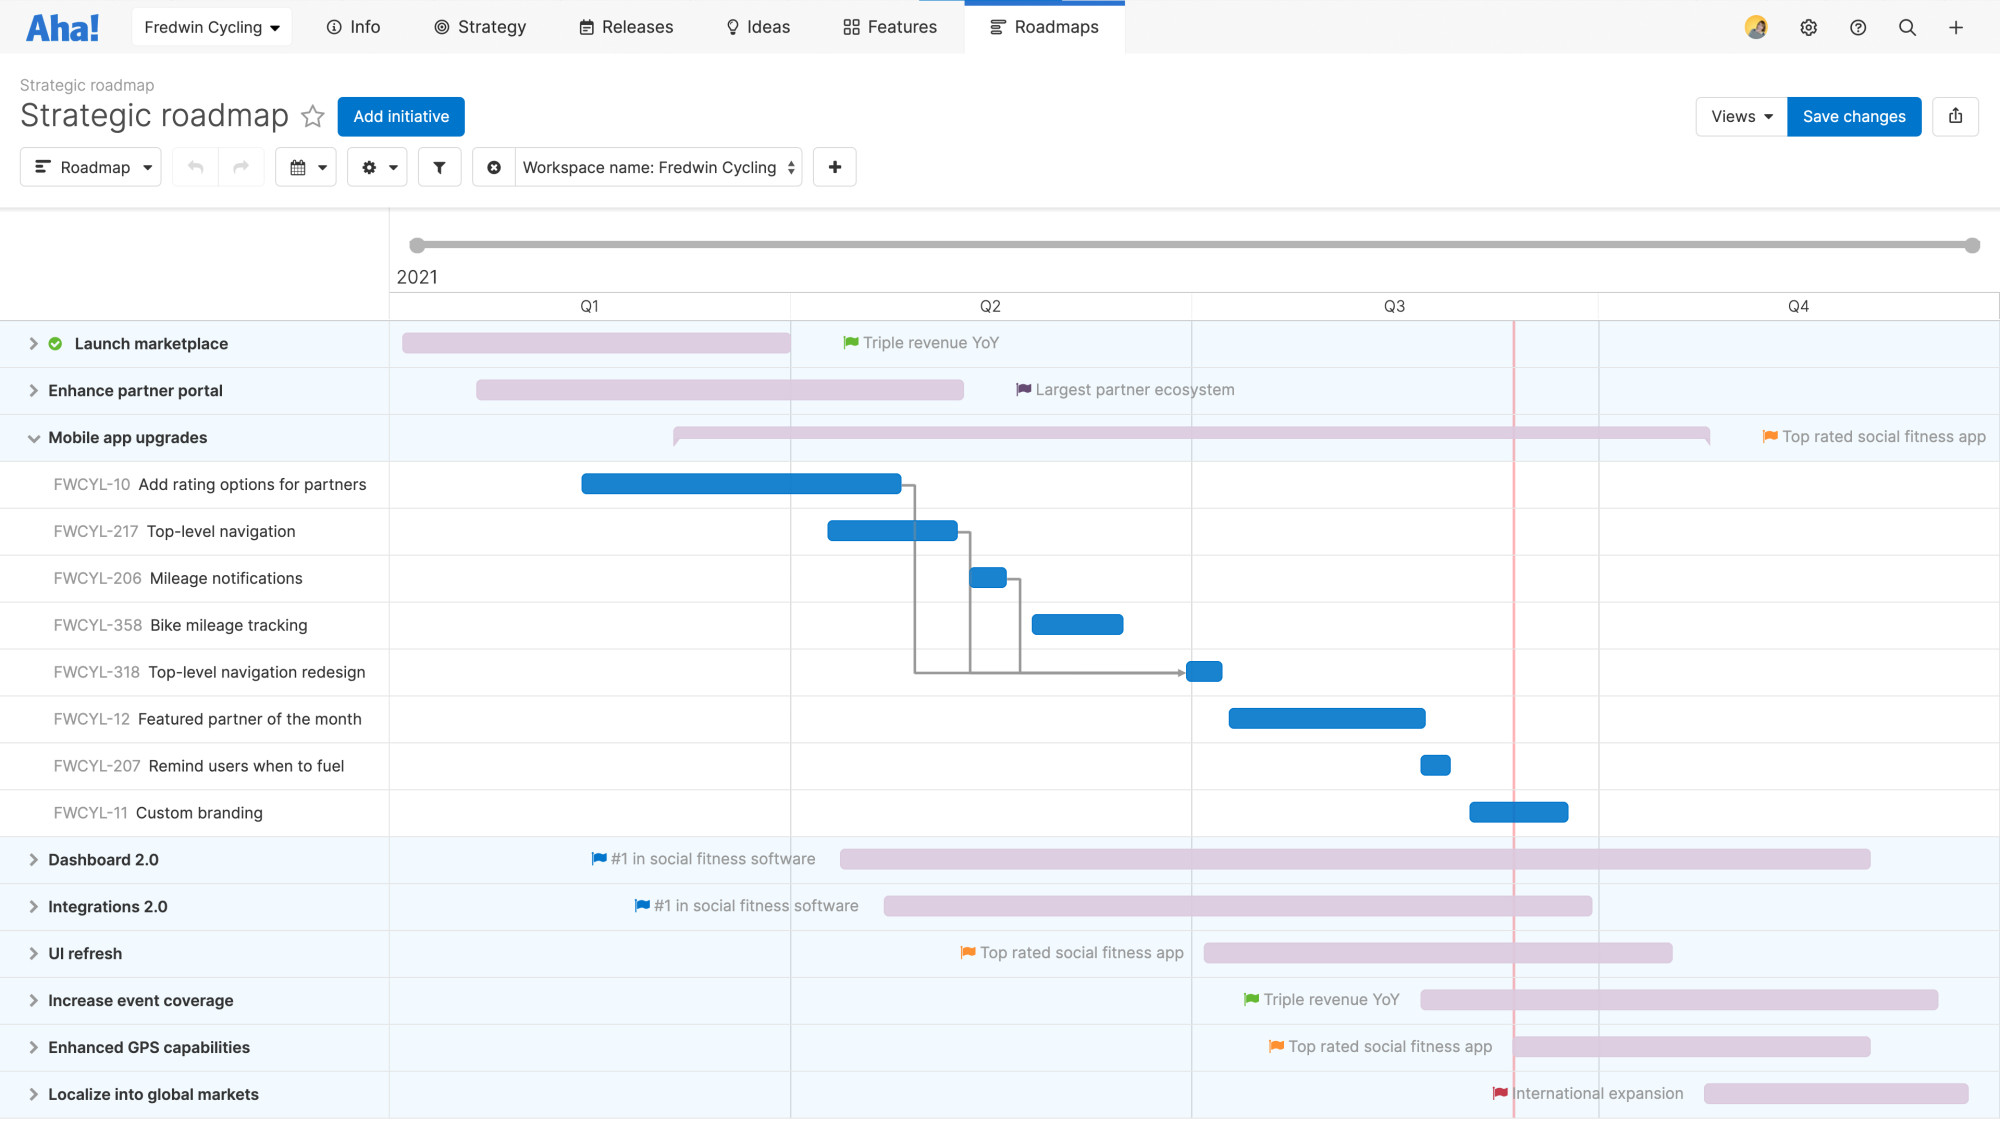 Strategic roadmap showing epics and child features linked by dependencies.